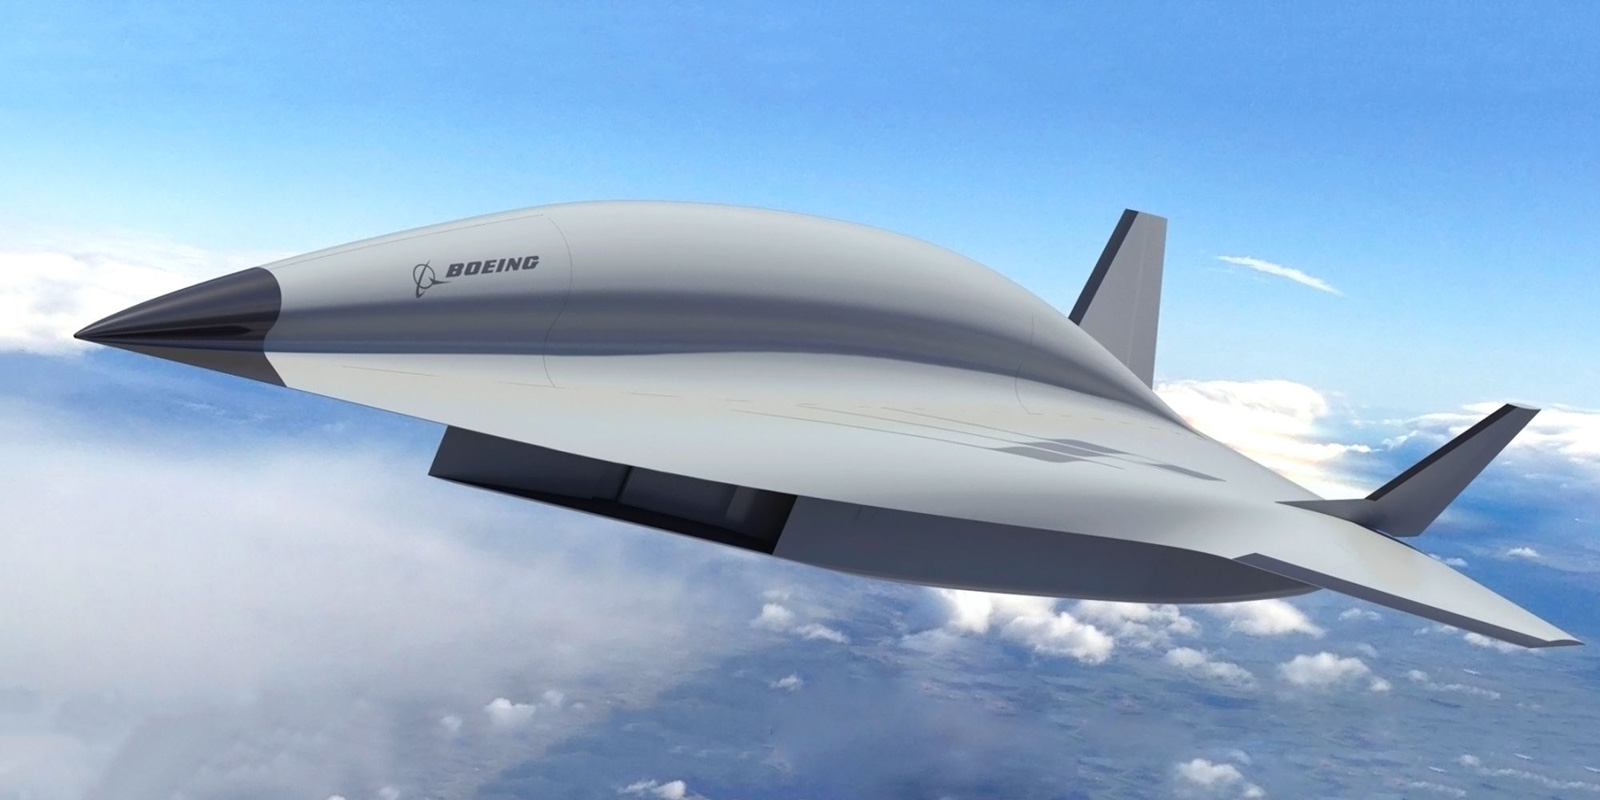 Boeing shows its vision for a hypersonic spy aircraft